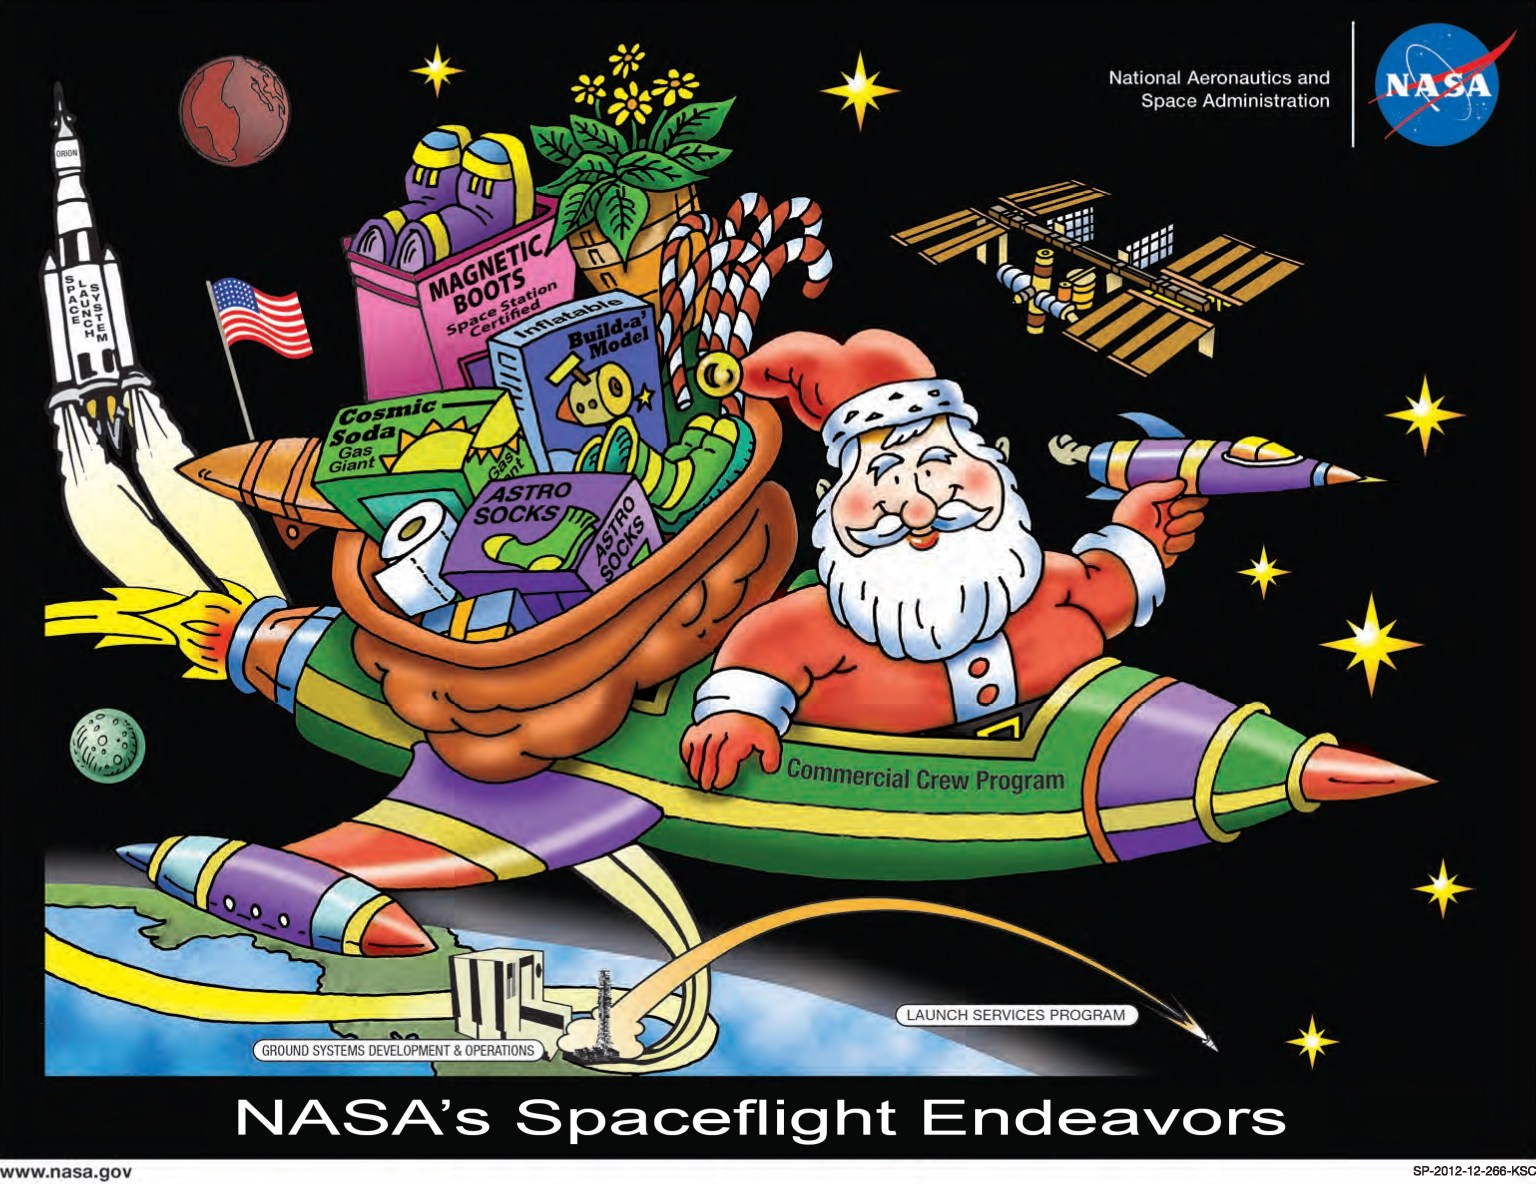 Kennedy Space Center's holiday poster